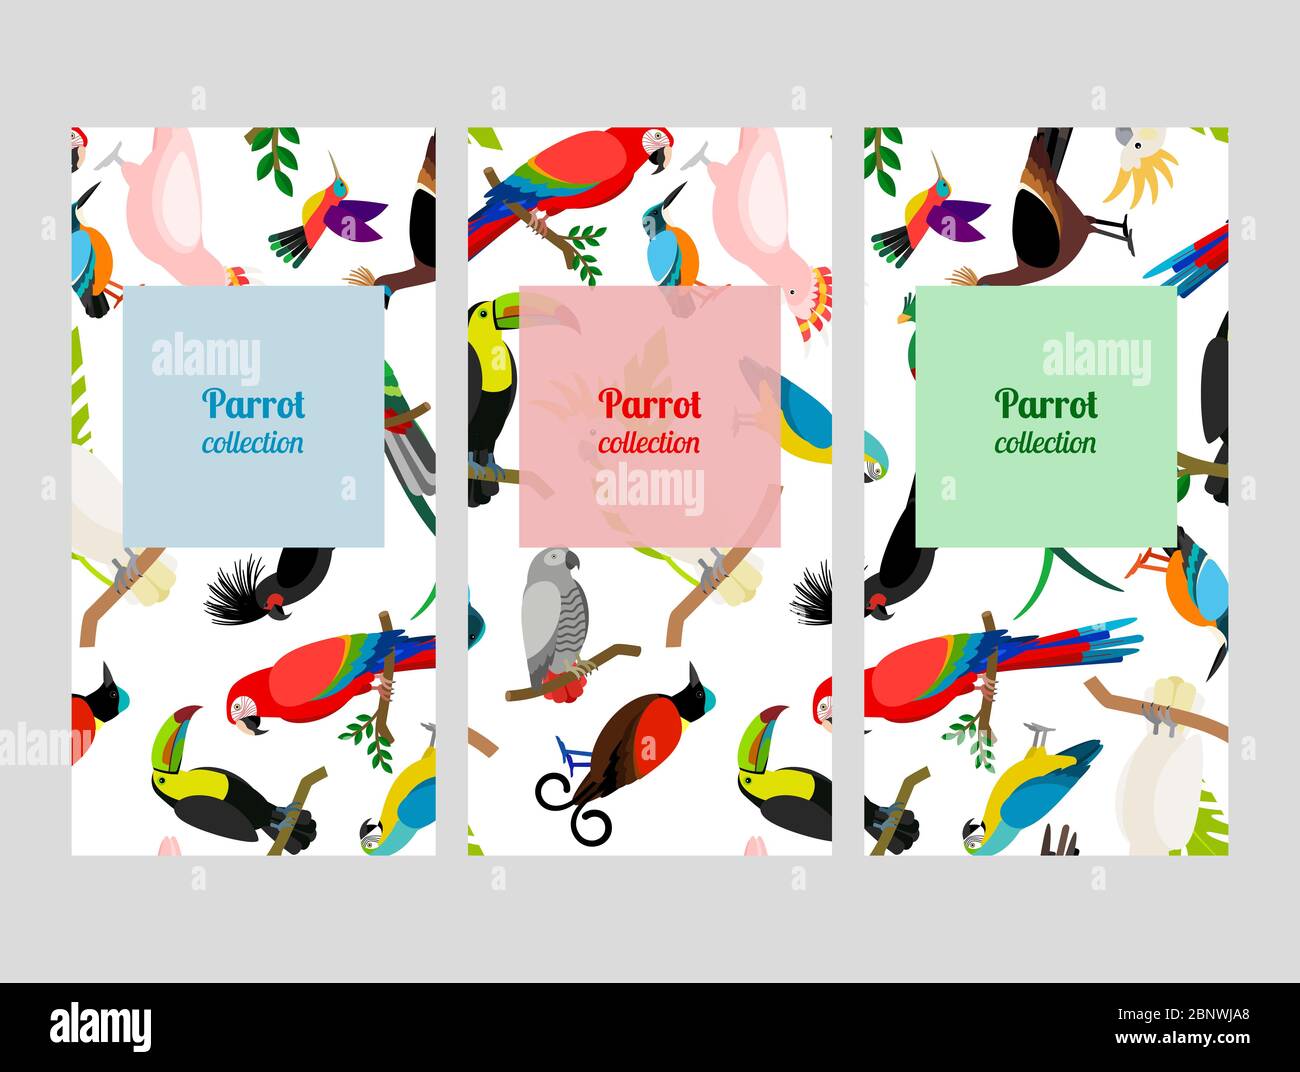 Parrot flyers collection with birds patterns. Vector illustration Stock Vector